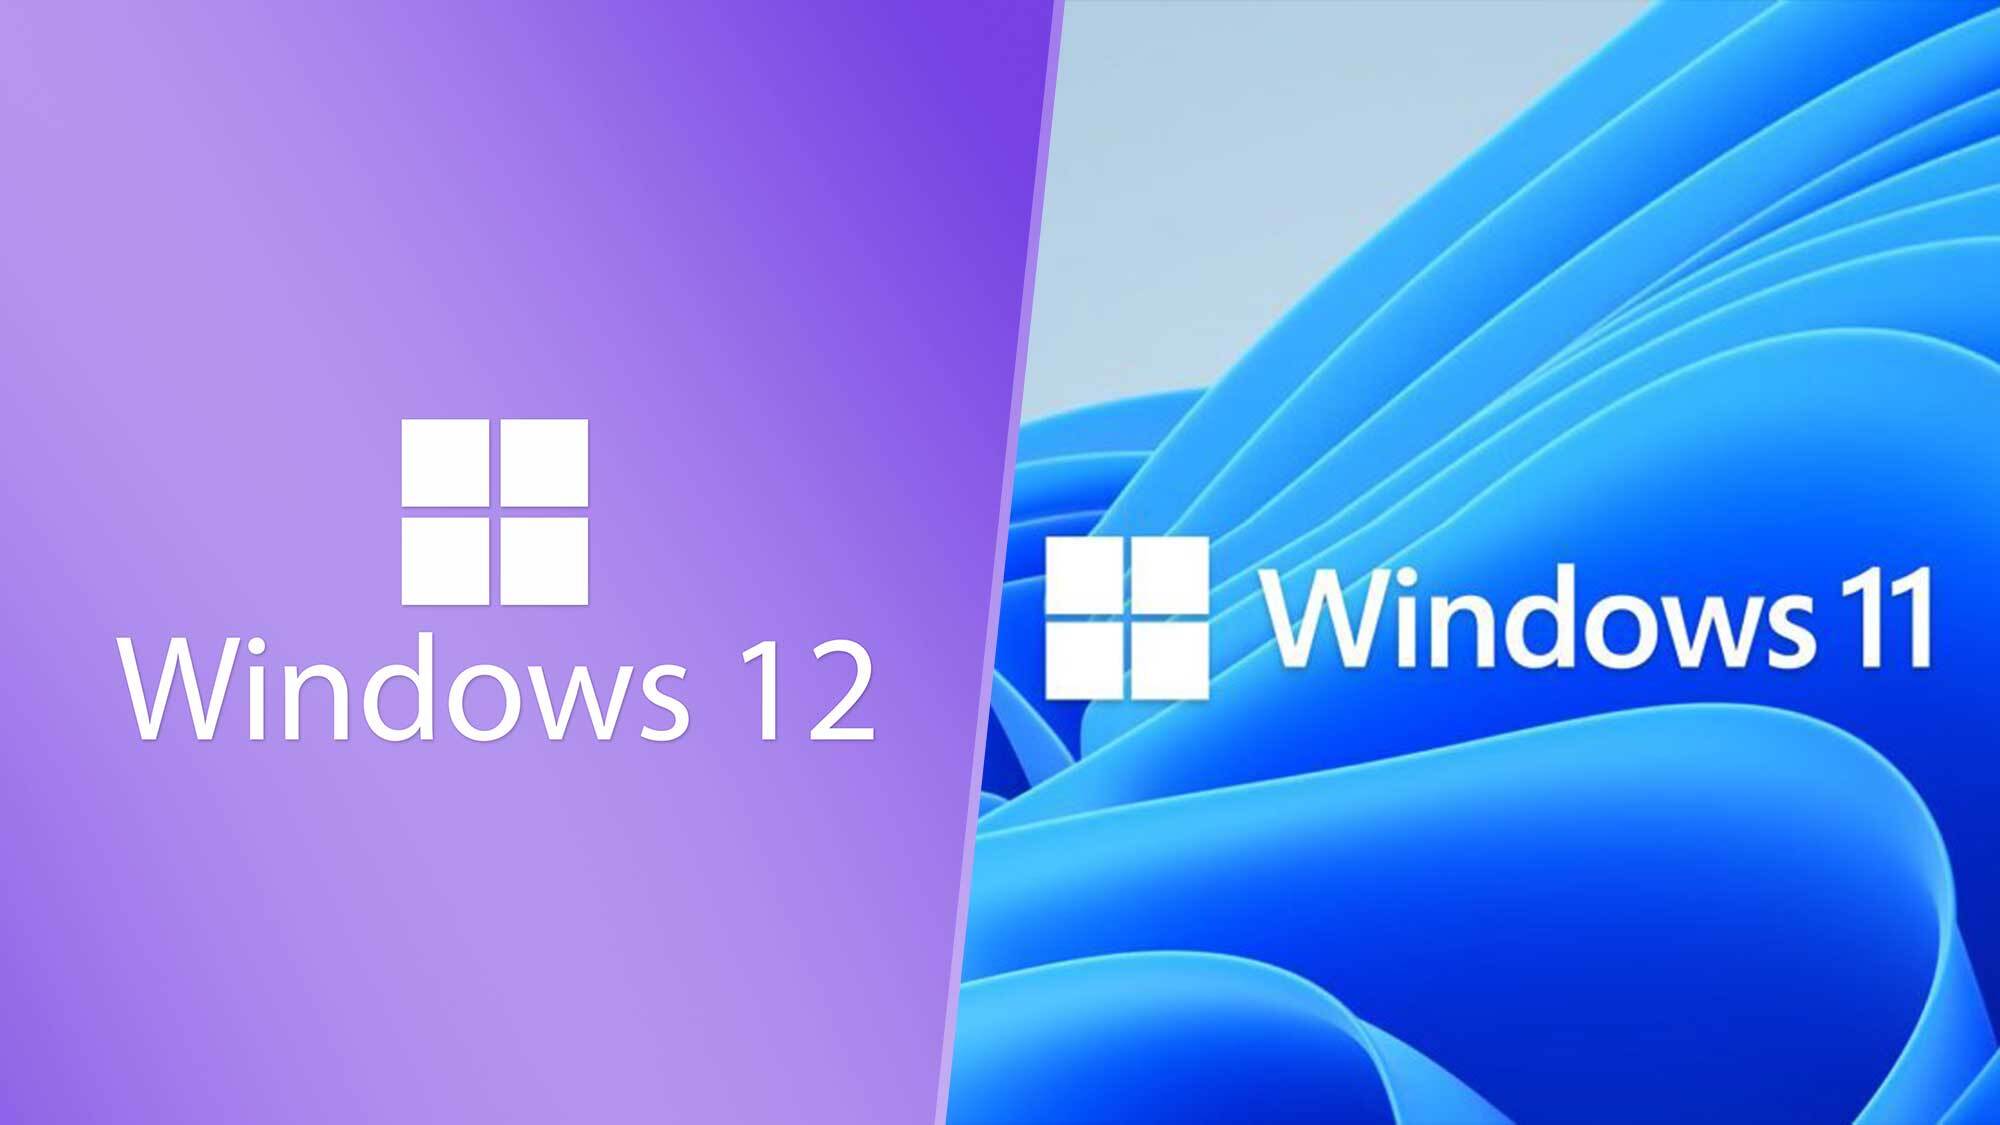 Windows 11, claimed to be the 'best Windows ever for gaming', is